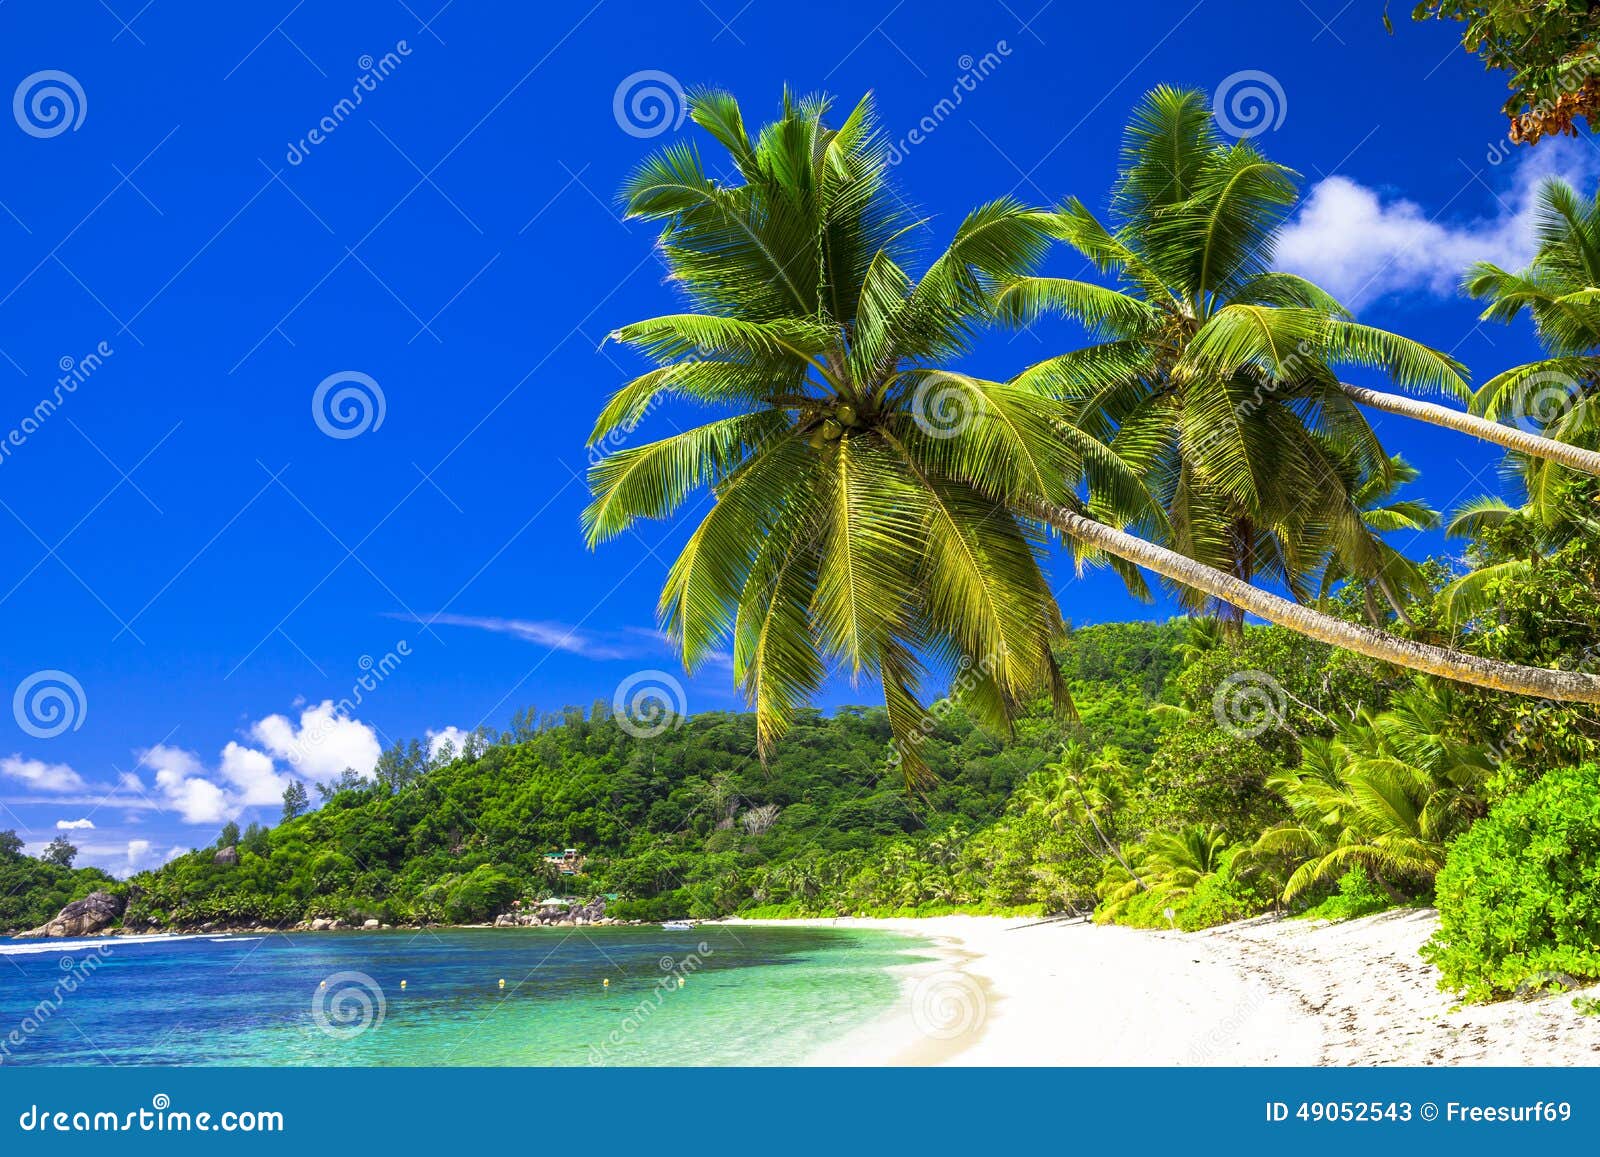 scenic beach with coconut palms